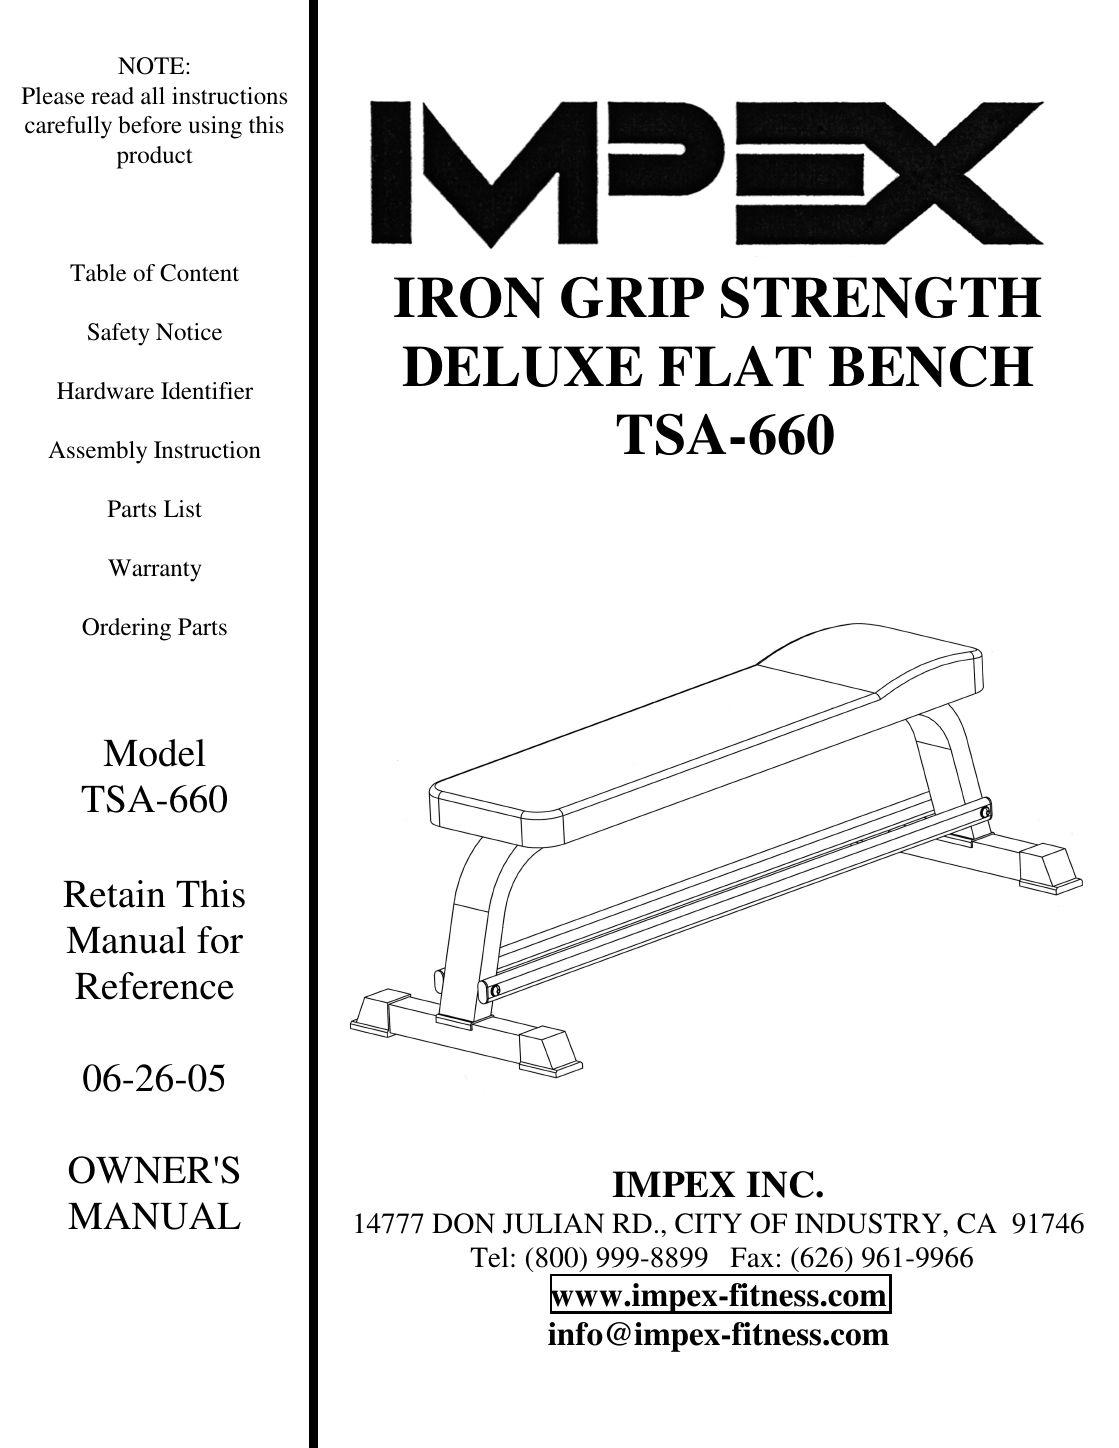 Page 1 of 8 - Impex-Fitness Impex-Fitness-Tsa-660-Users-Manual- PARTS LIST  Impex-fitness-tsa-660-users-manual